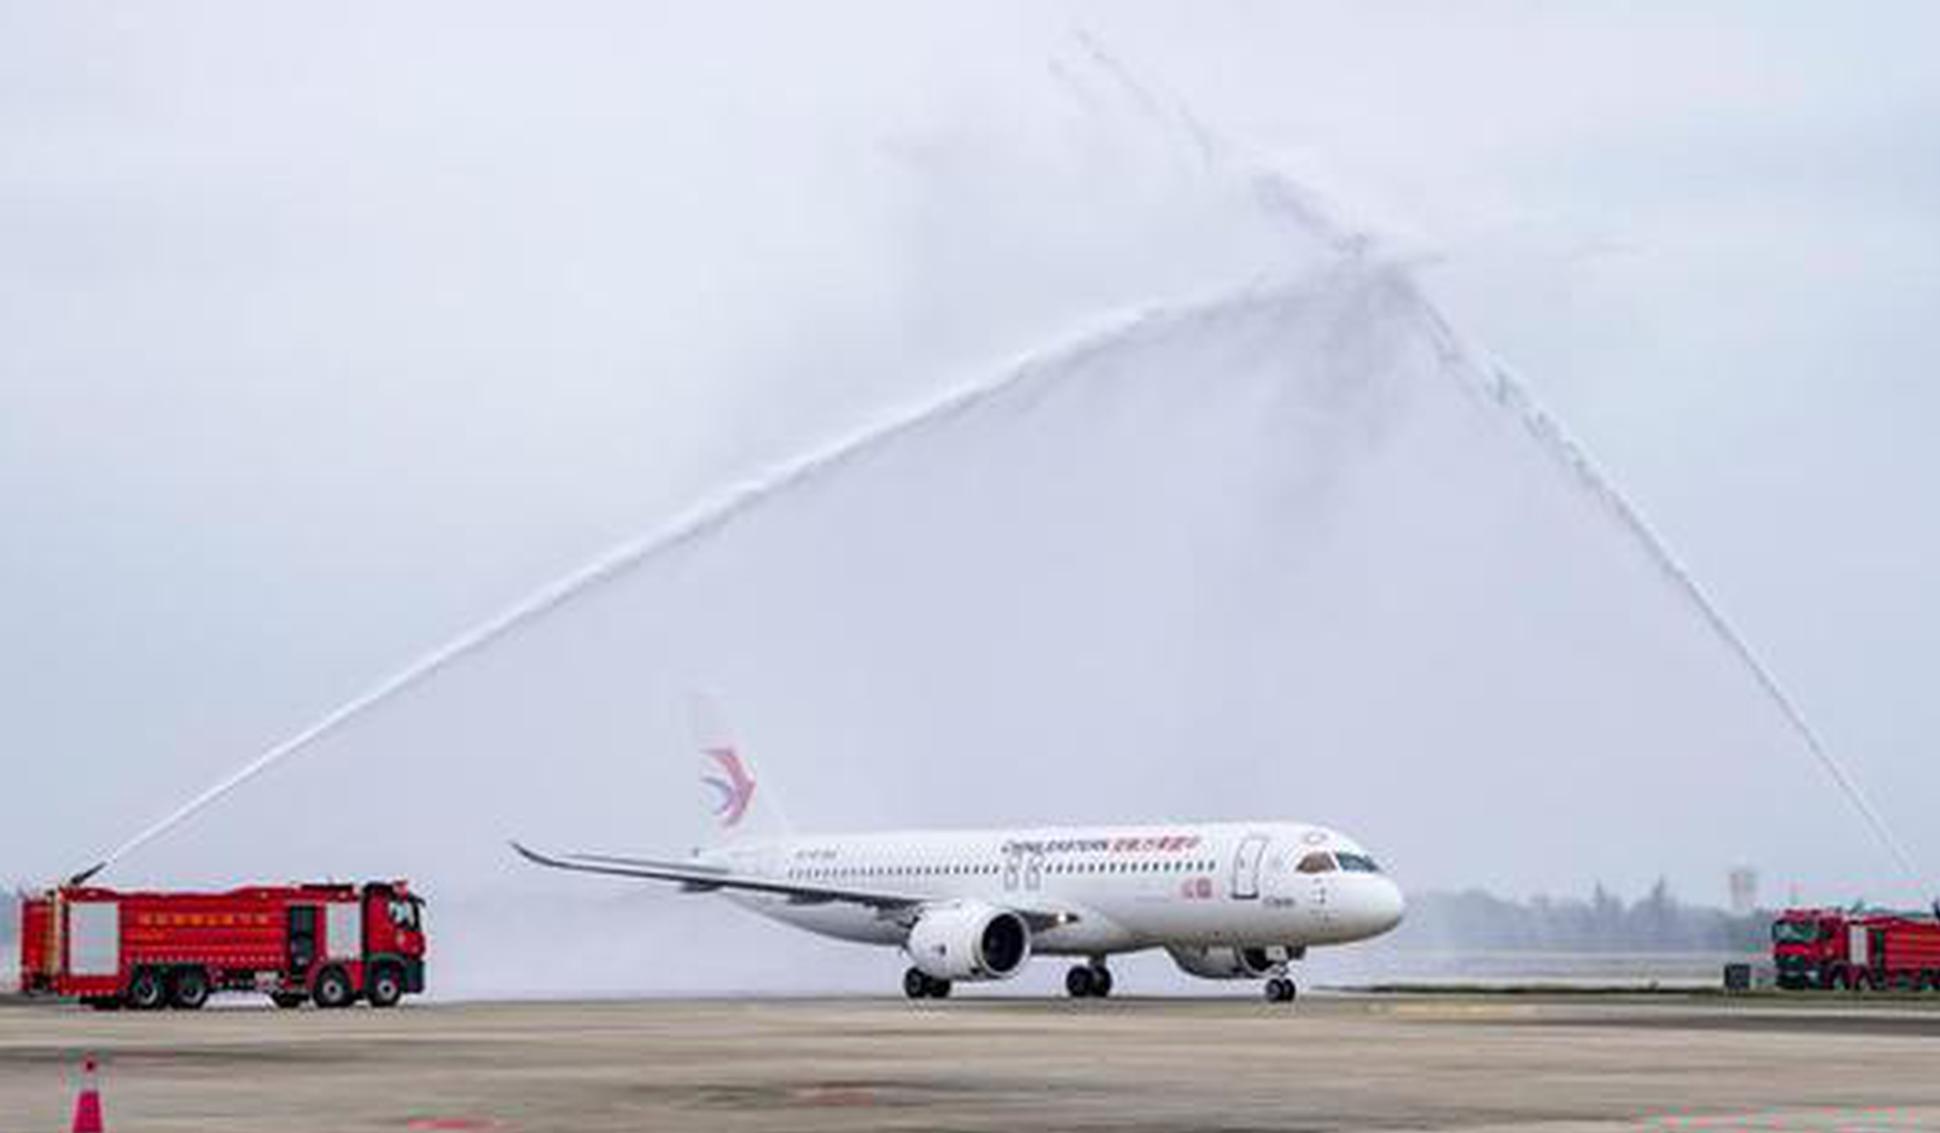 Chinese airline adds frequency of validation flights of C919 jetliner